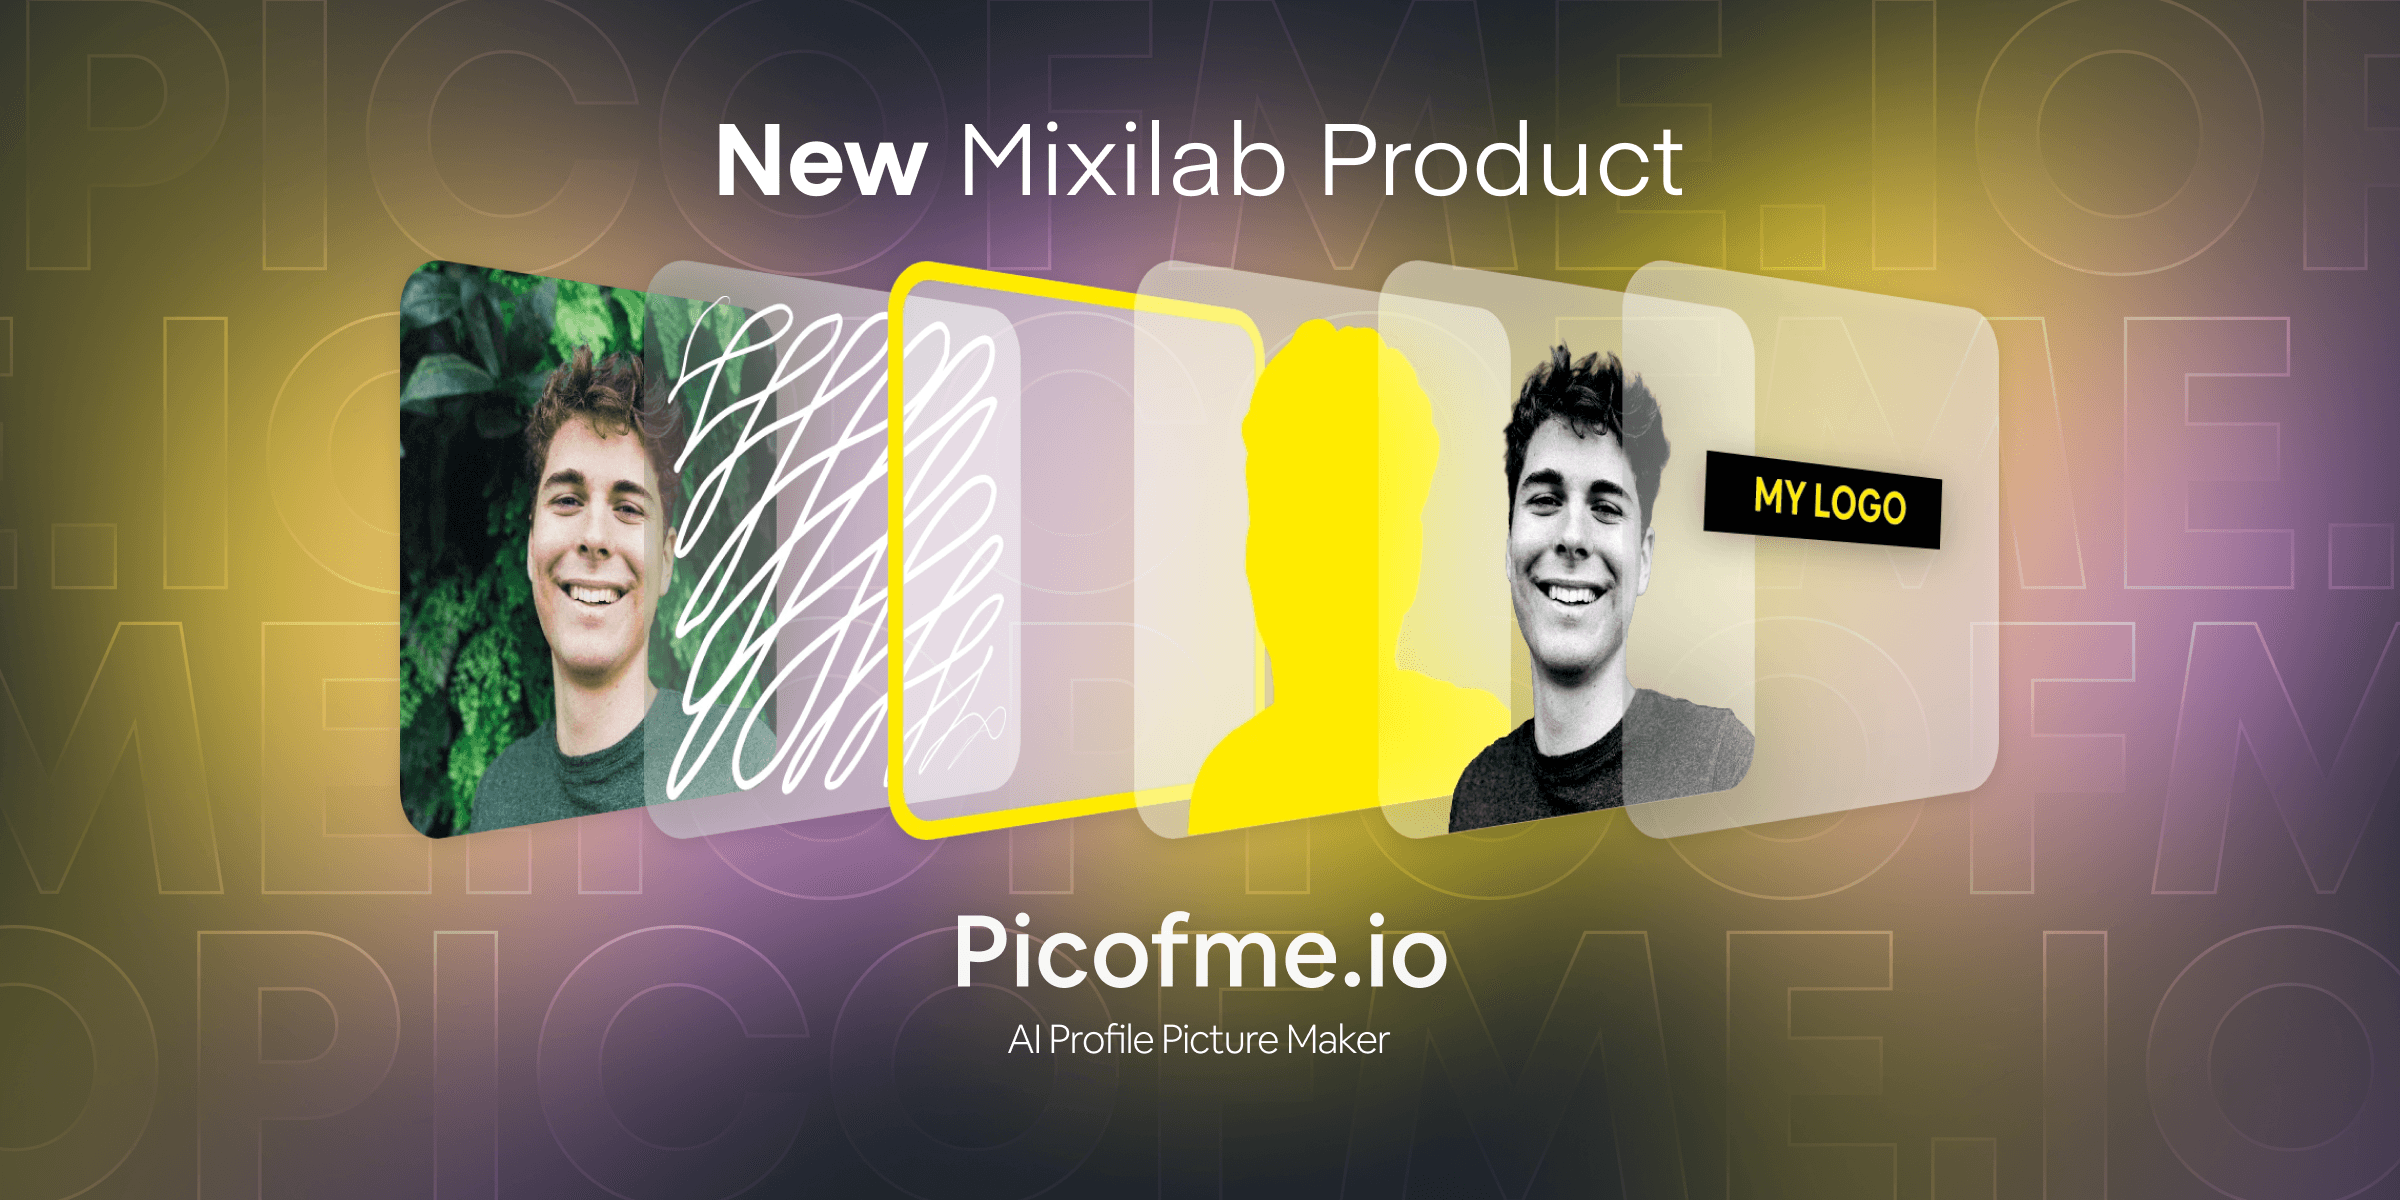 Say Goodbye to Boring Profile Pictures: Picofme.io by Mixilab